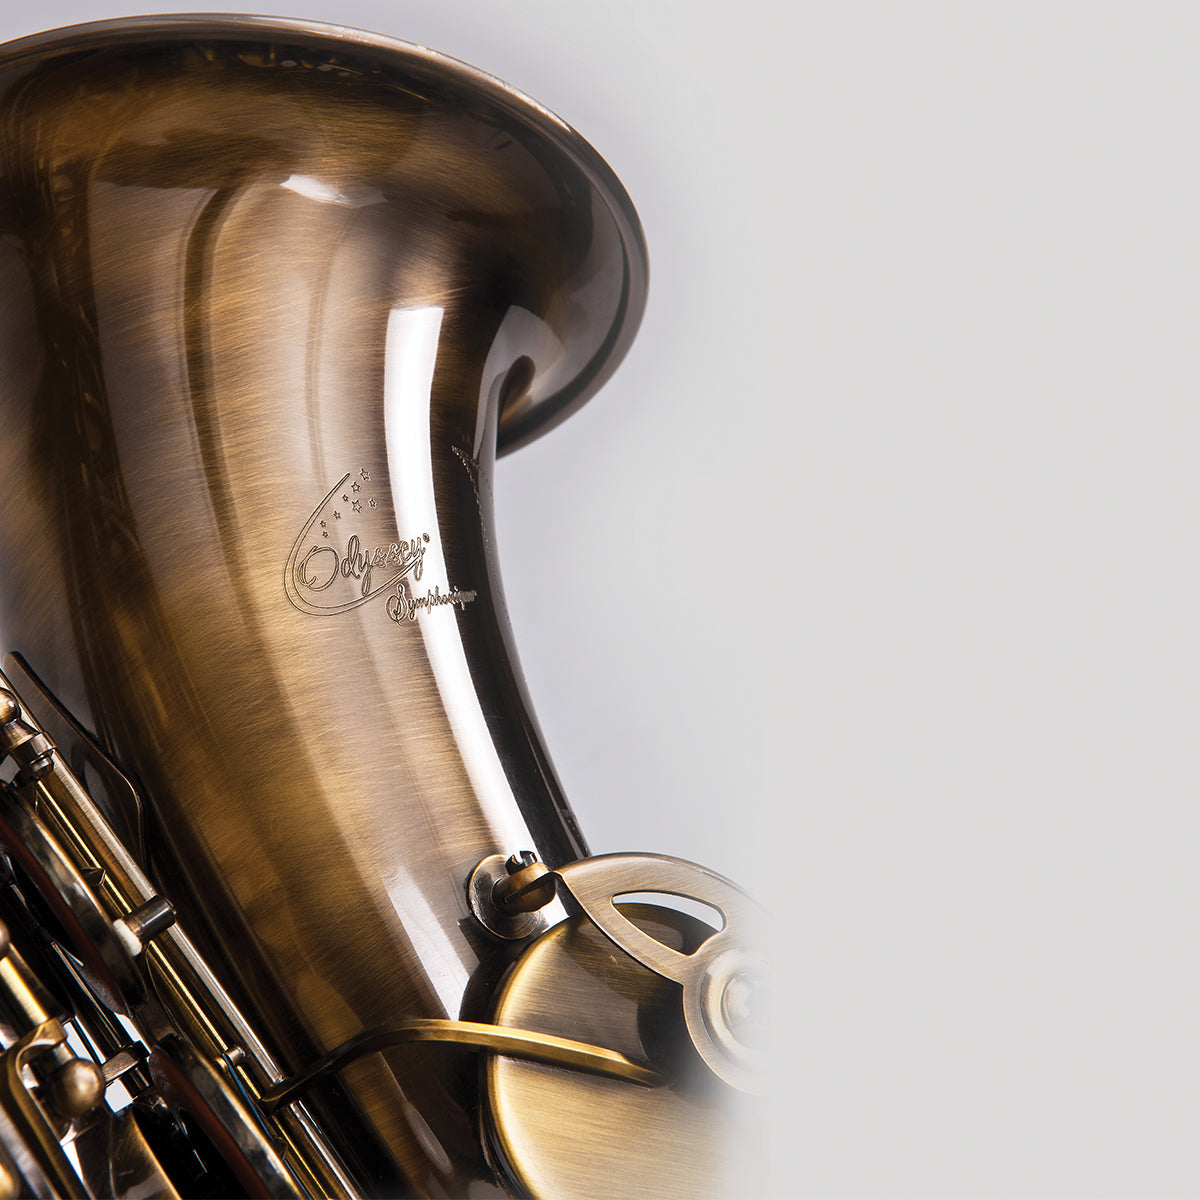 Odyssey Symphonique 'Bb' Tenor Saxophone Outfit | Distressed